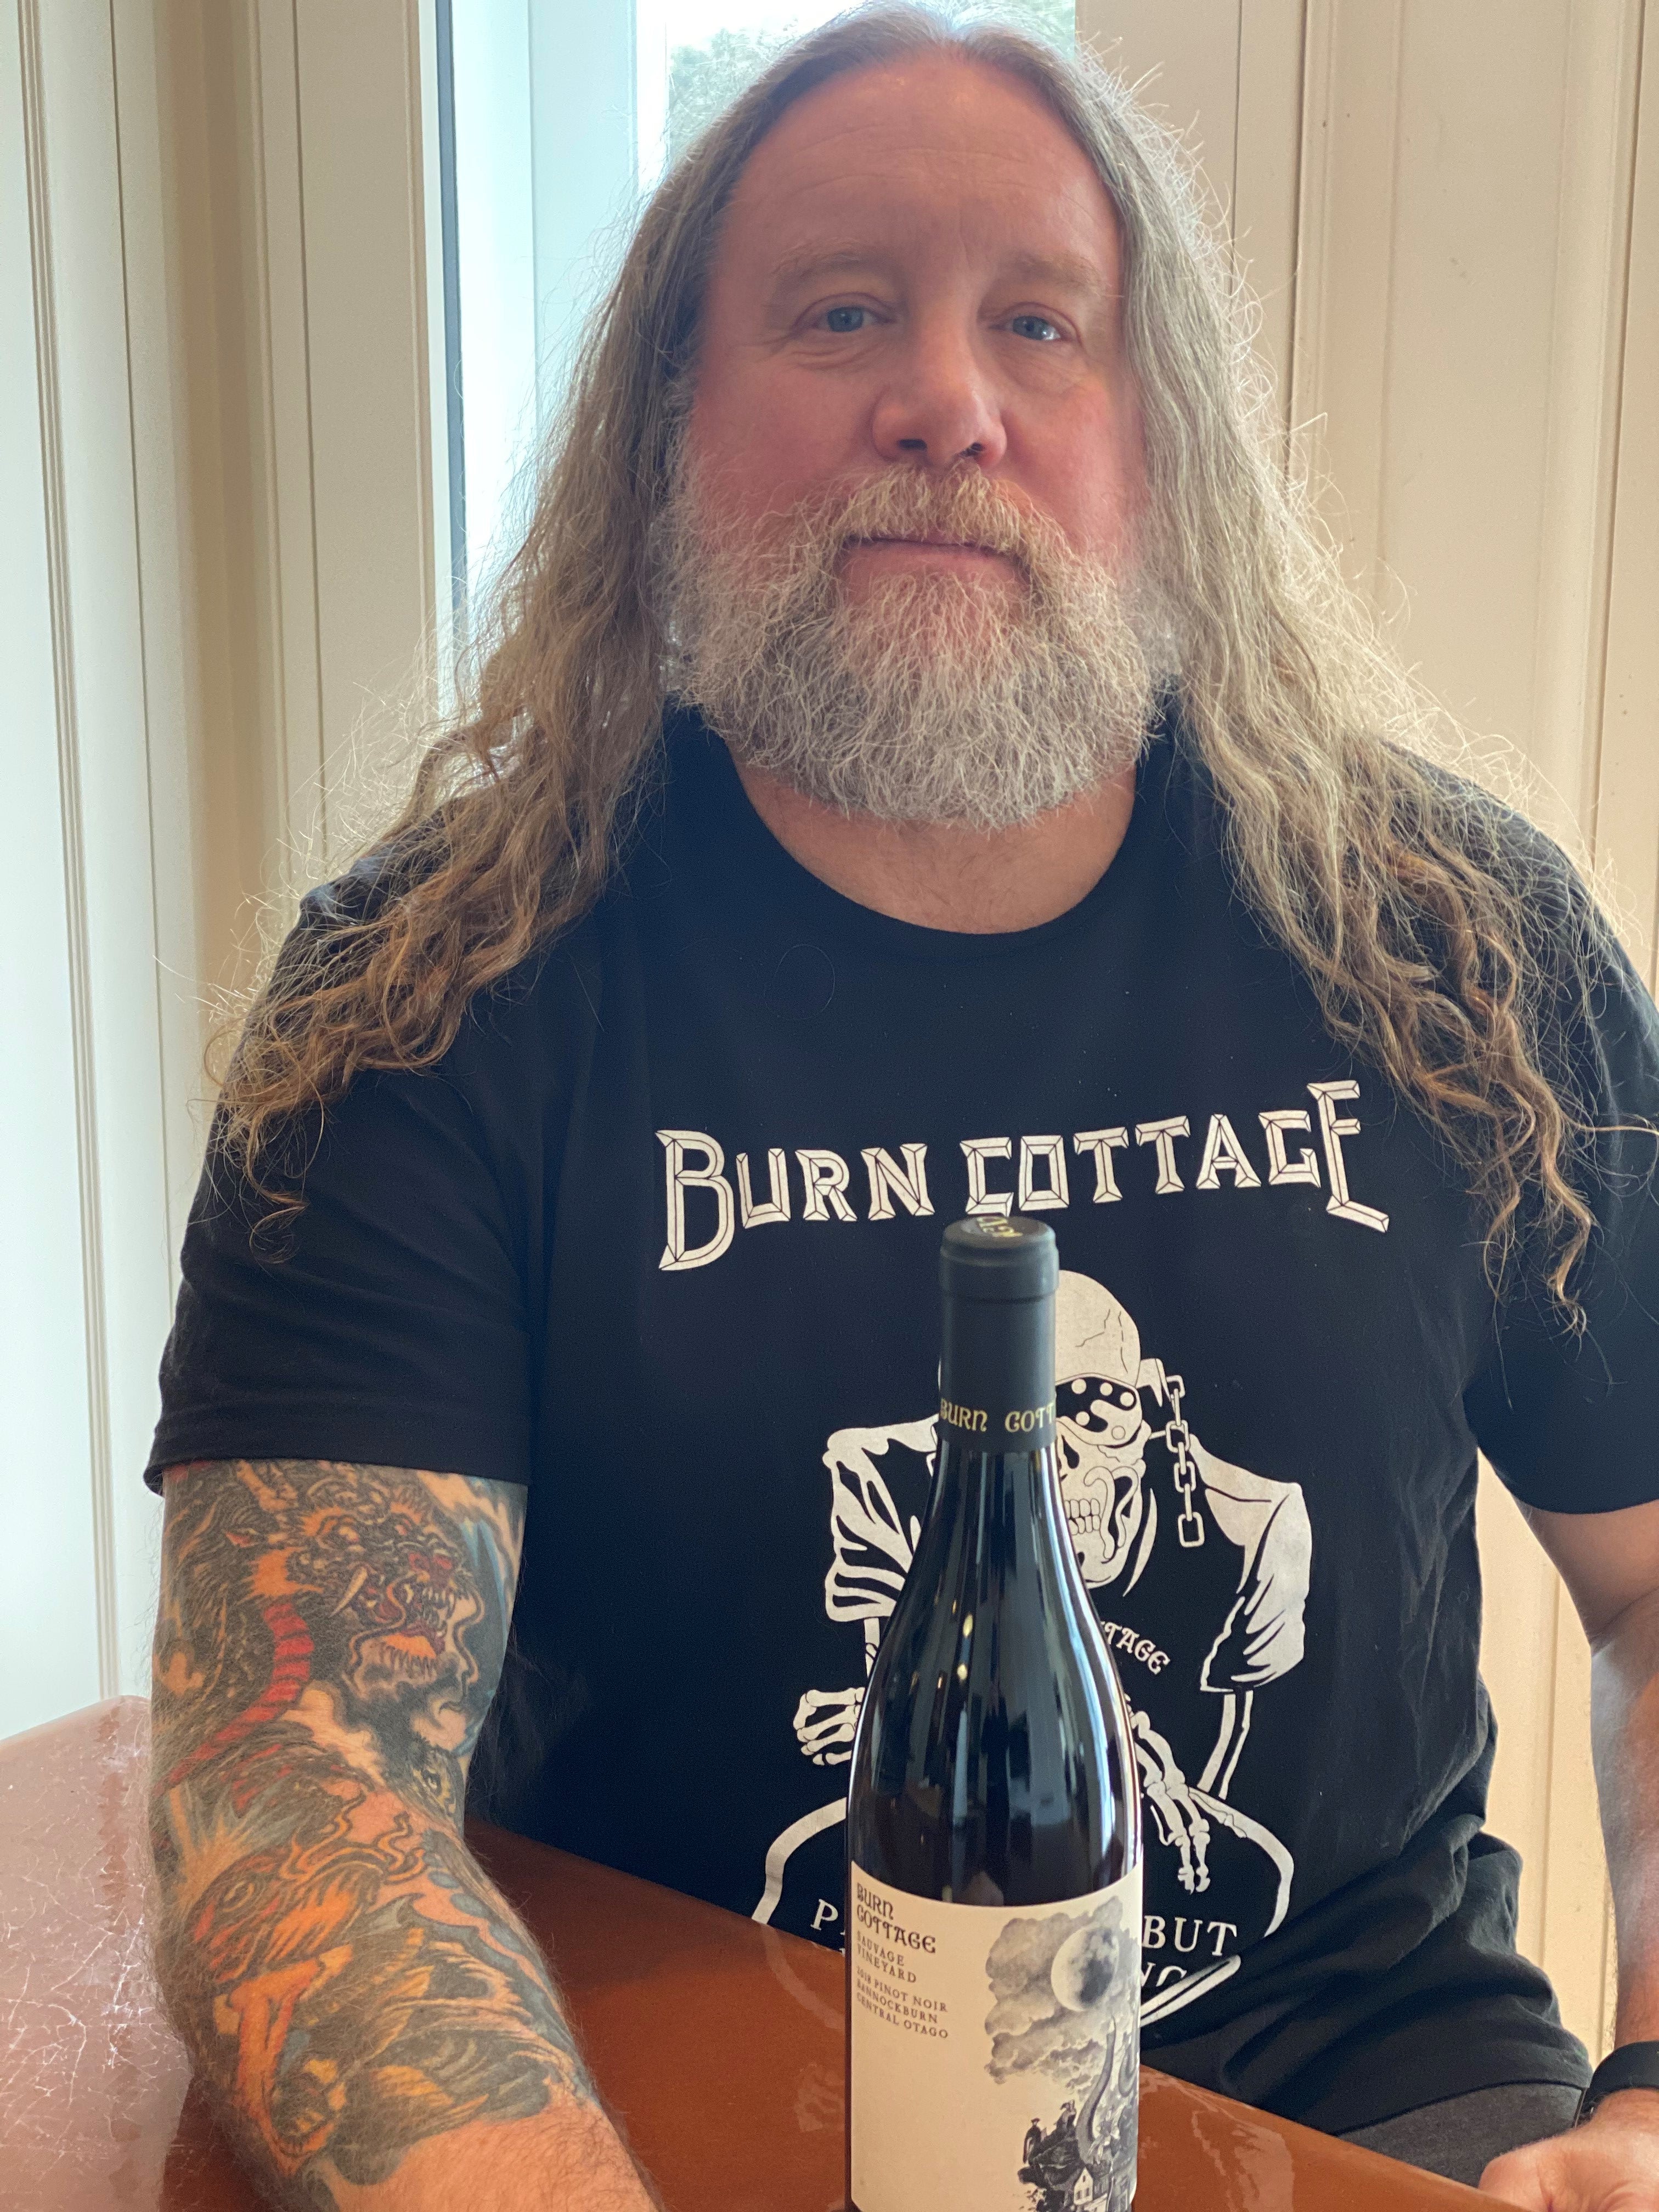 Burn Cottage "Sauvage" Vineyard Pinot Noir 2018  - The Inaugural Release.